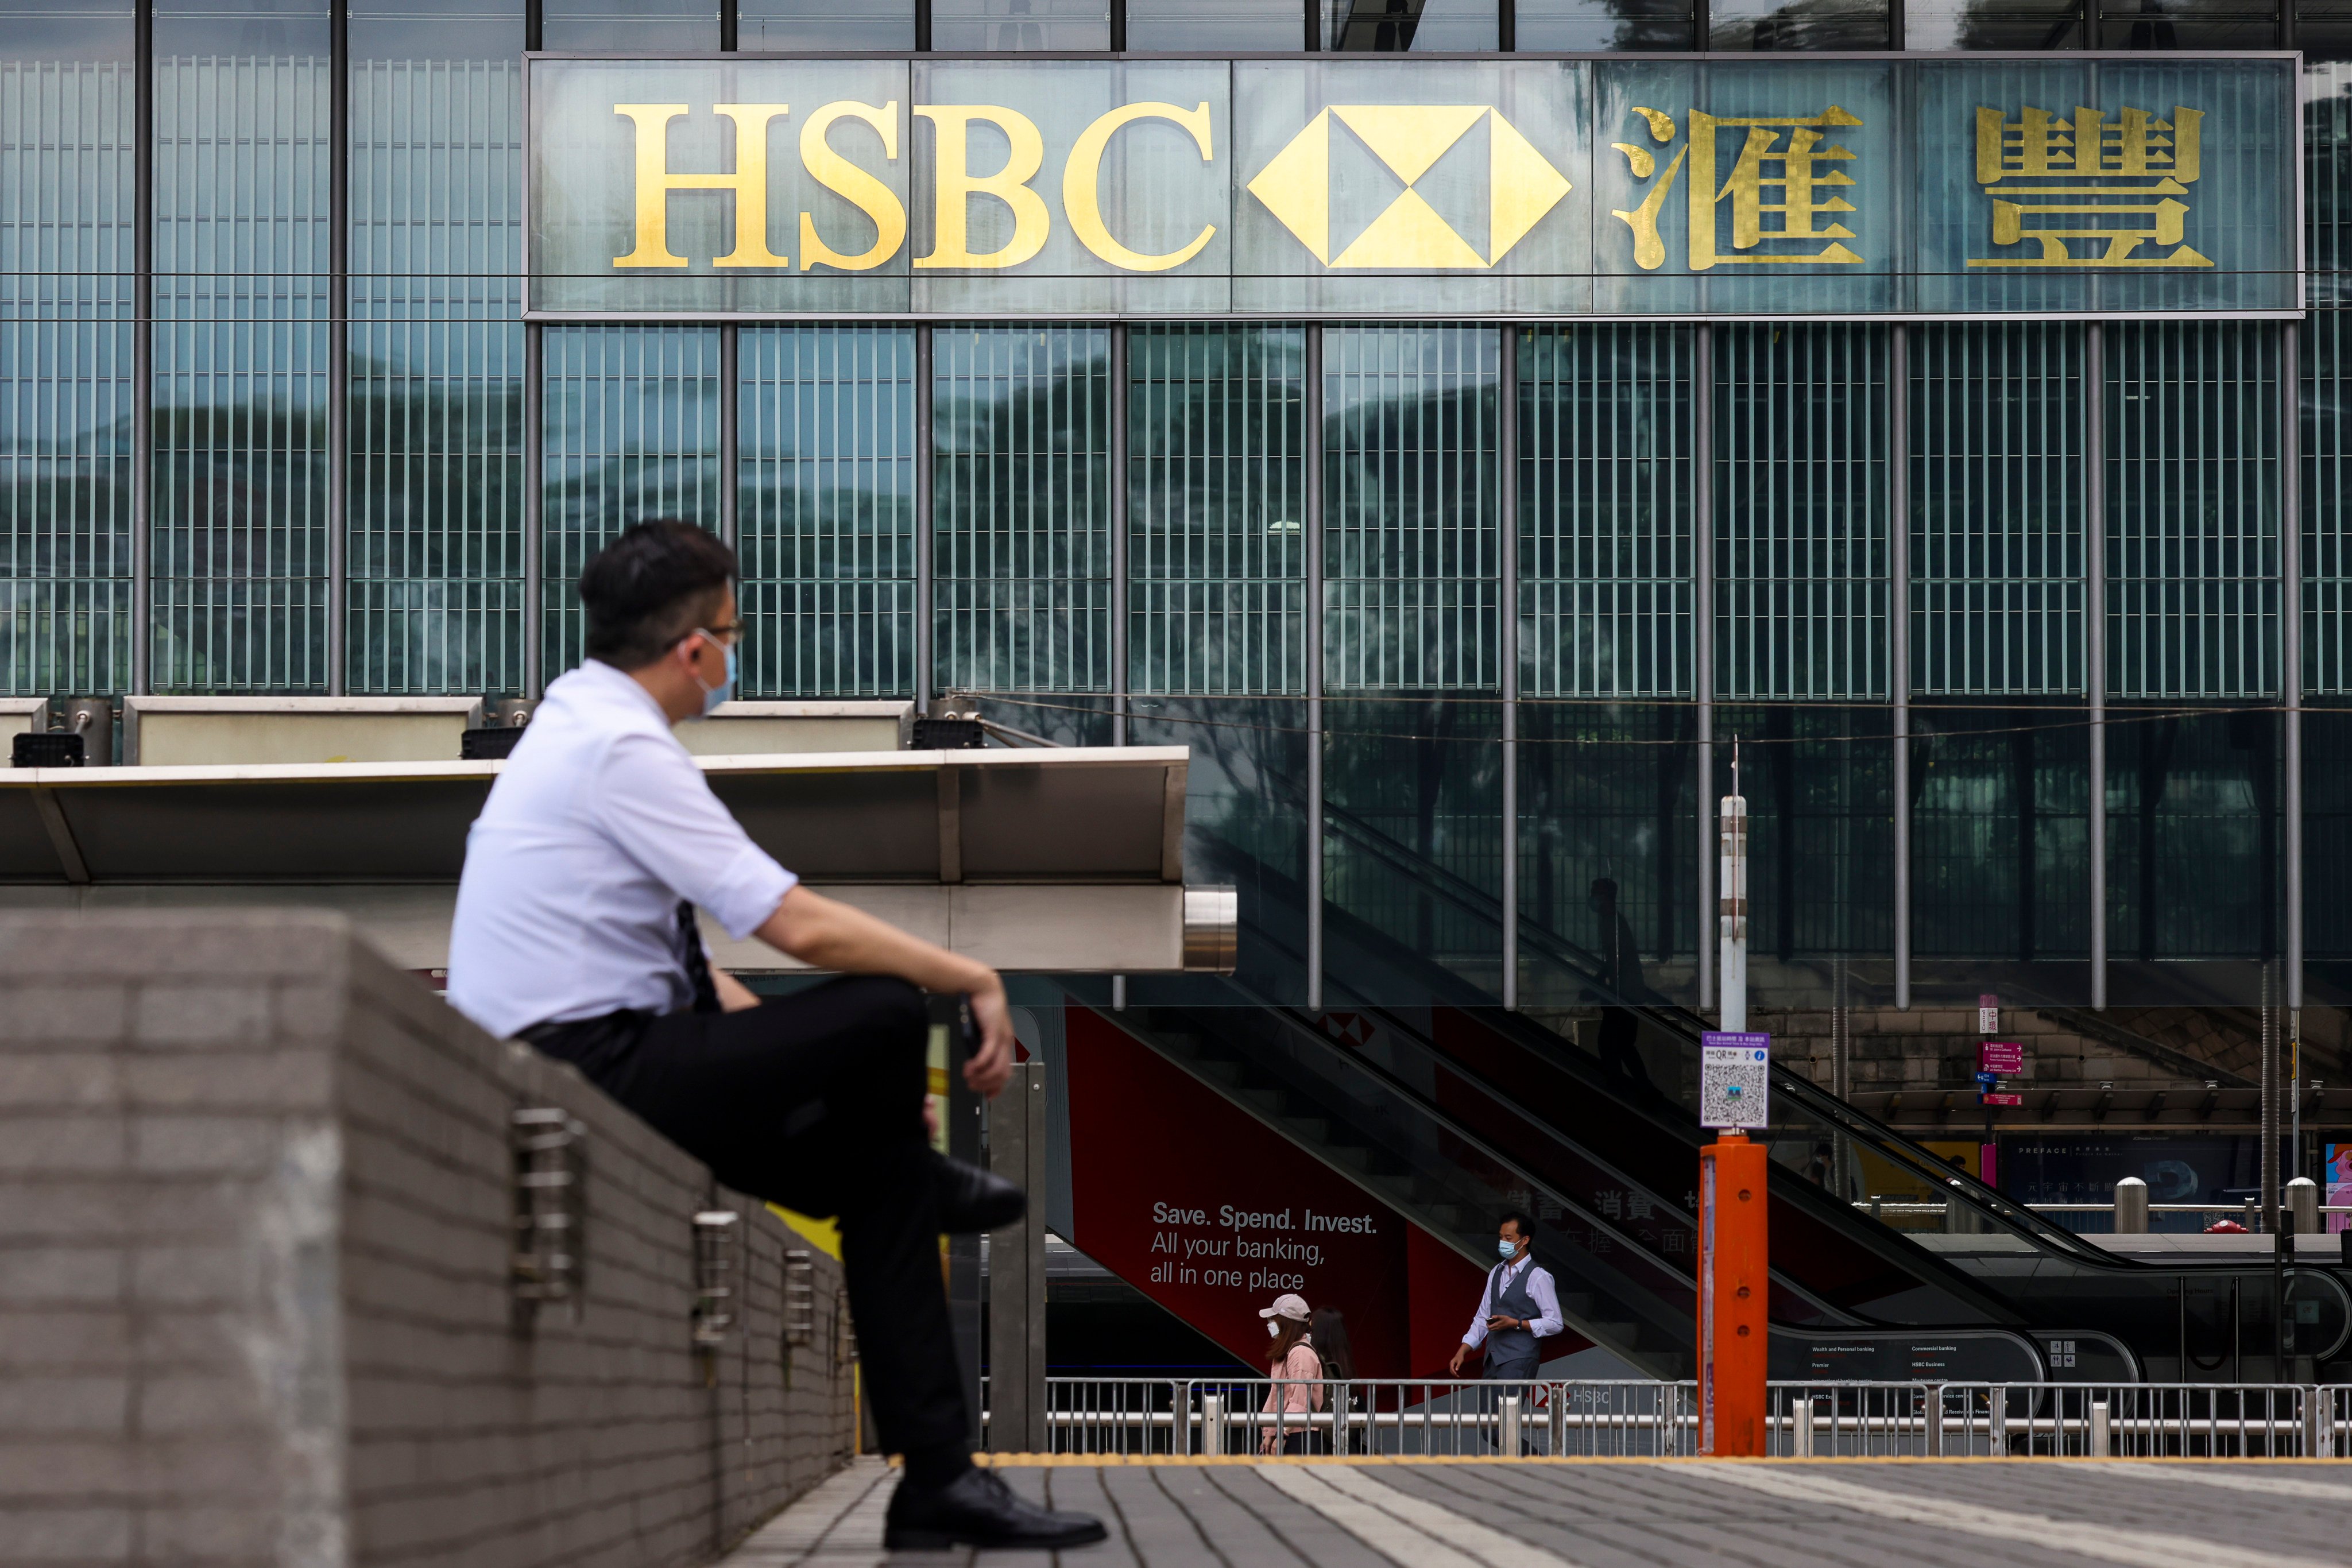 HSBC’s main building in Central. Hong Kong, takein in April 2022. Photo: Nora Tam